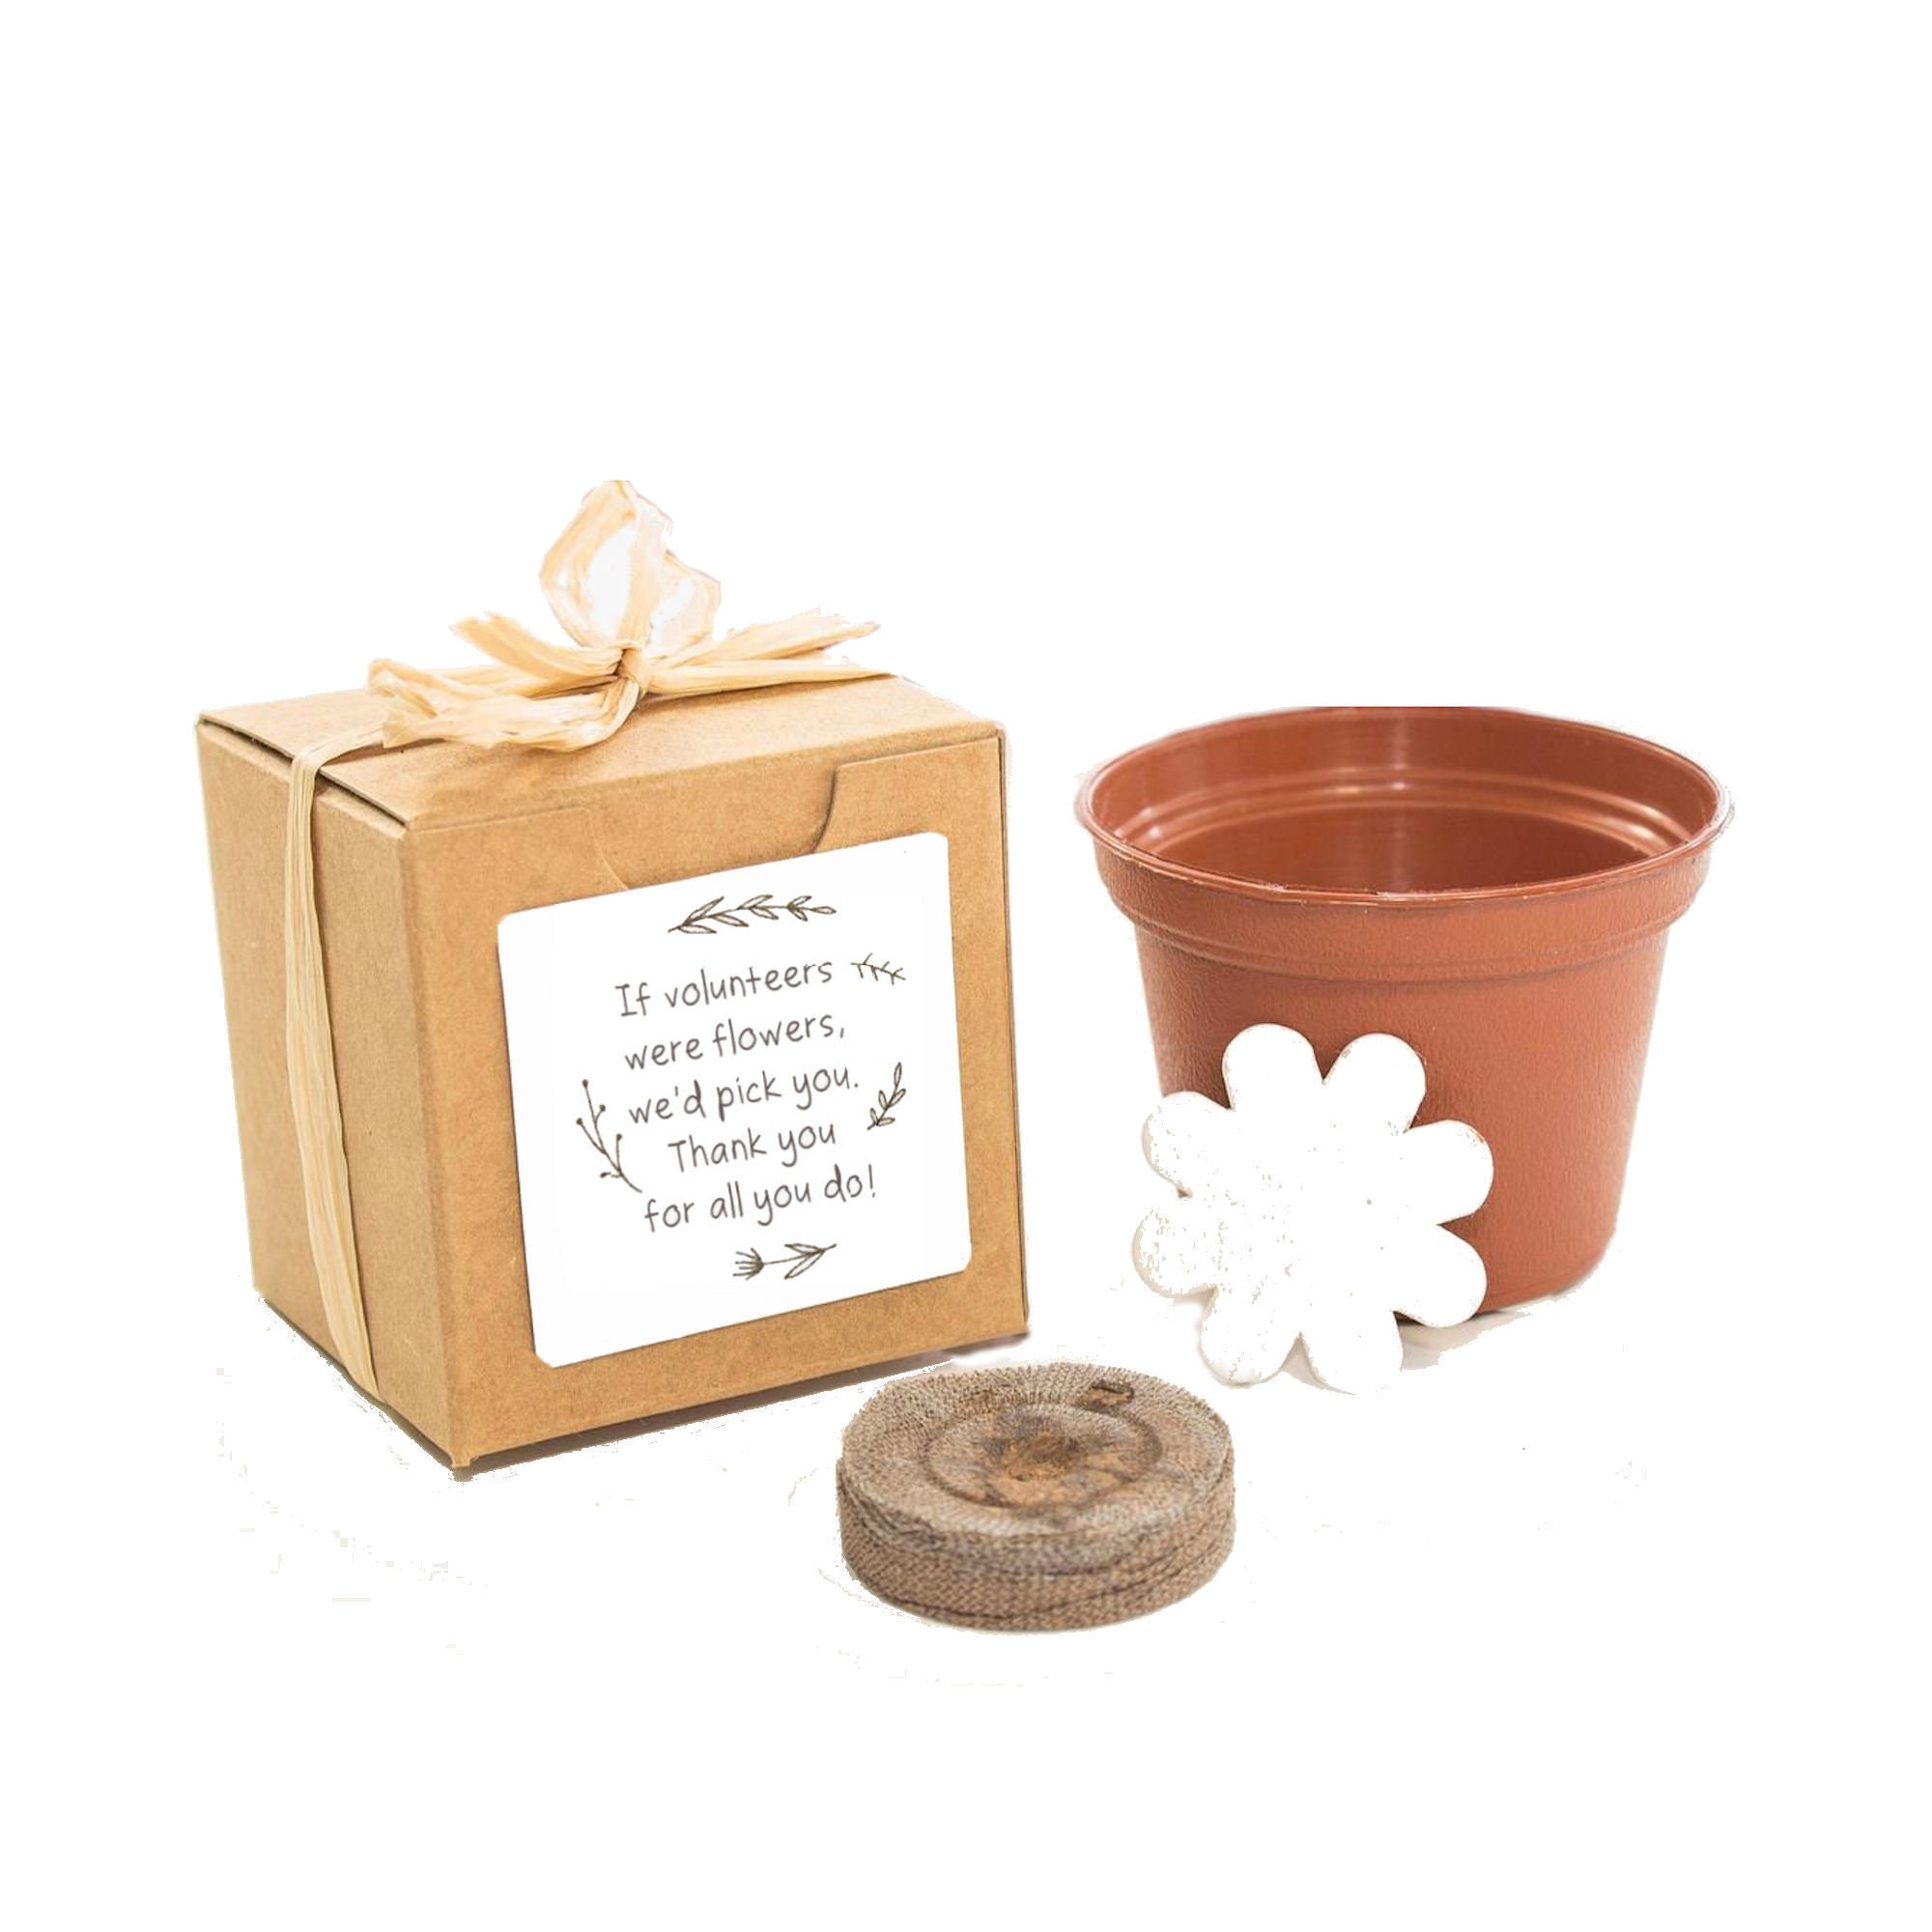 Volunteer Appreciation Gift, Small Flower Garden Planter Grow Kit Thank You  Gift, Sustainable Employee Gift, Parent Volunteer Thank You Gift 